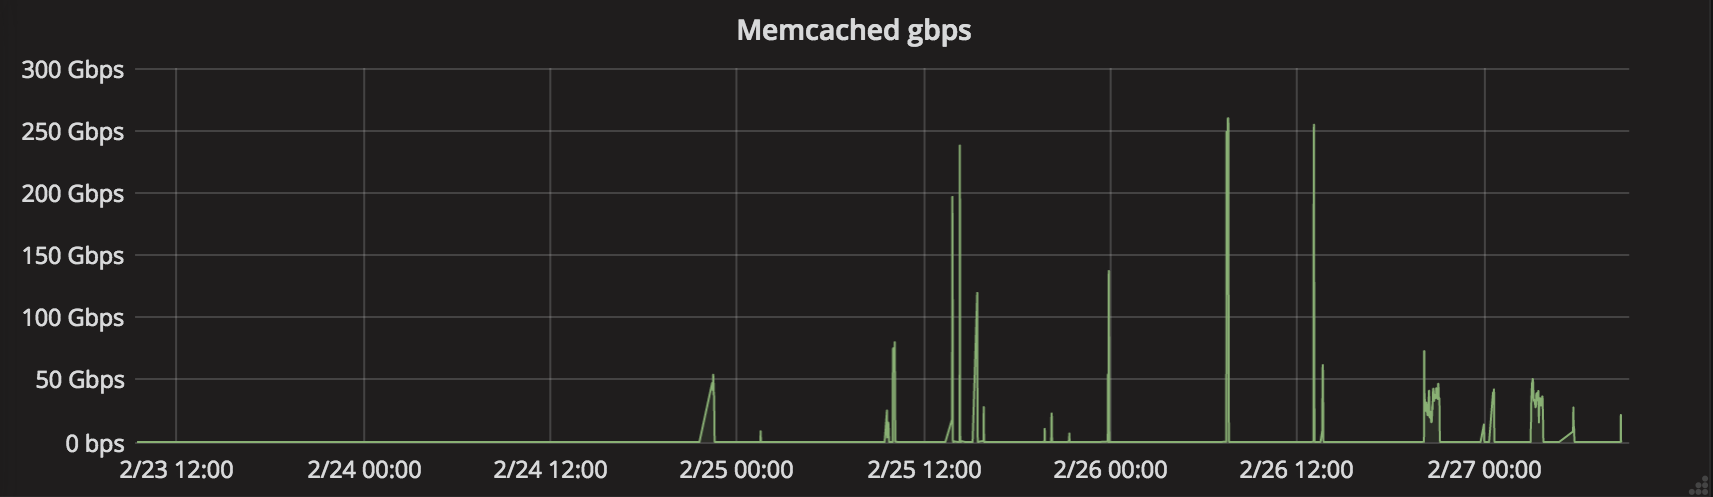 Memcached DDoS Attack